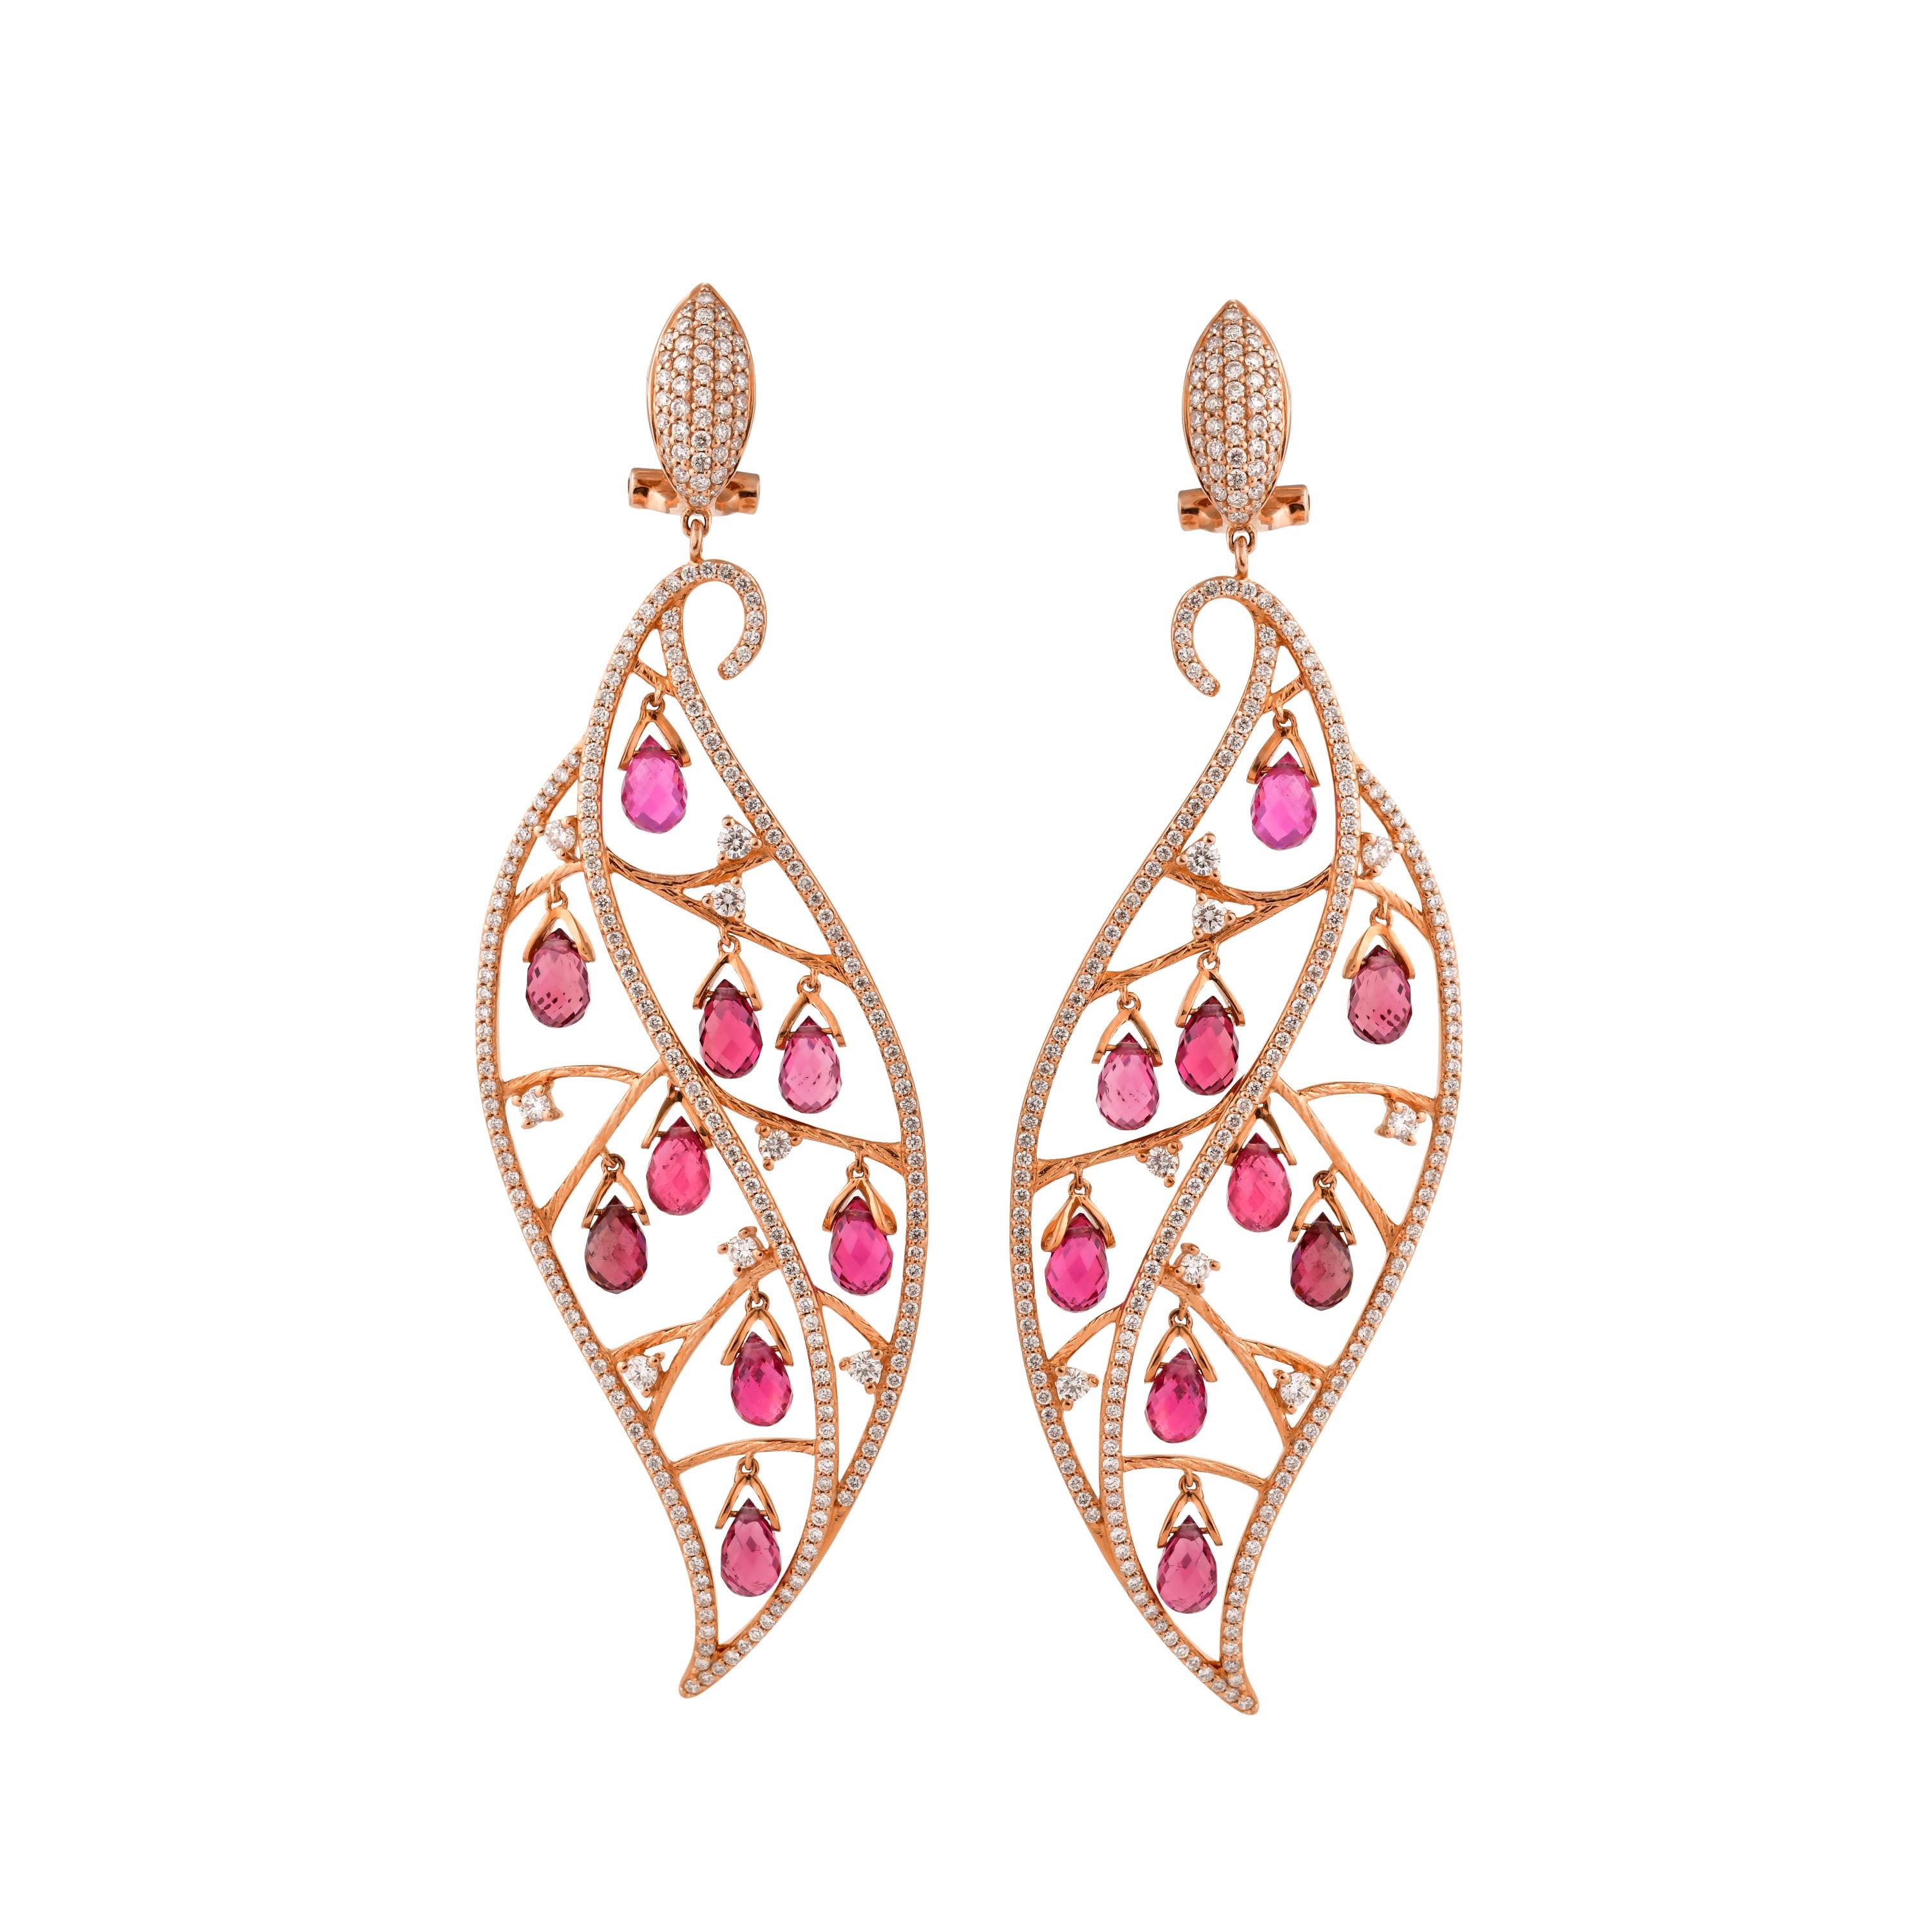 An exclusive collection of designer and unique dangle earrings by Sunita Nahata Fine Design. 

Pink Tourmaline Dangle Earring in 14 Karat Rose Gold.

Pink Tourmaline: 11.42 carat, 6X4 Size, Drop Shape.
White Diamond: 0.522 carat, 2.00 Size, Round